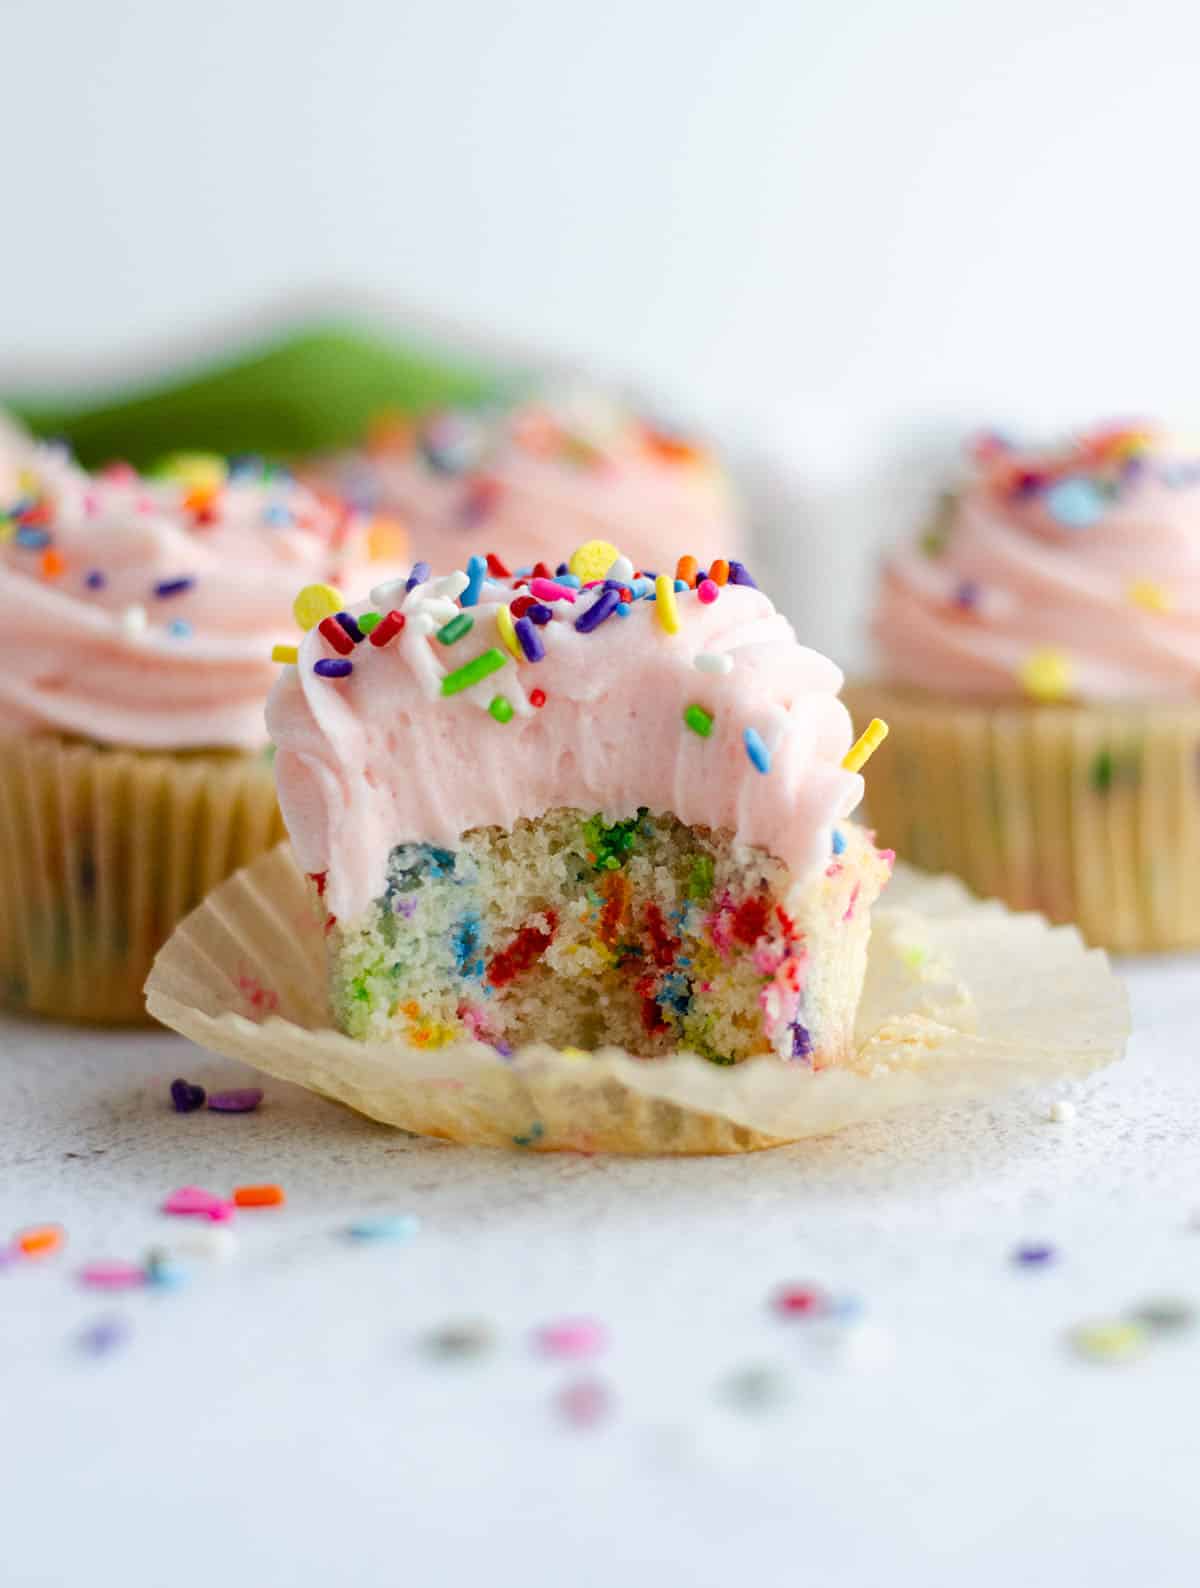 homemade funfetti cupcake with pink frosting and sitting in a wrapper that has been taken off and a bite taken out of it